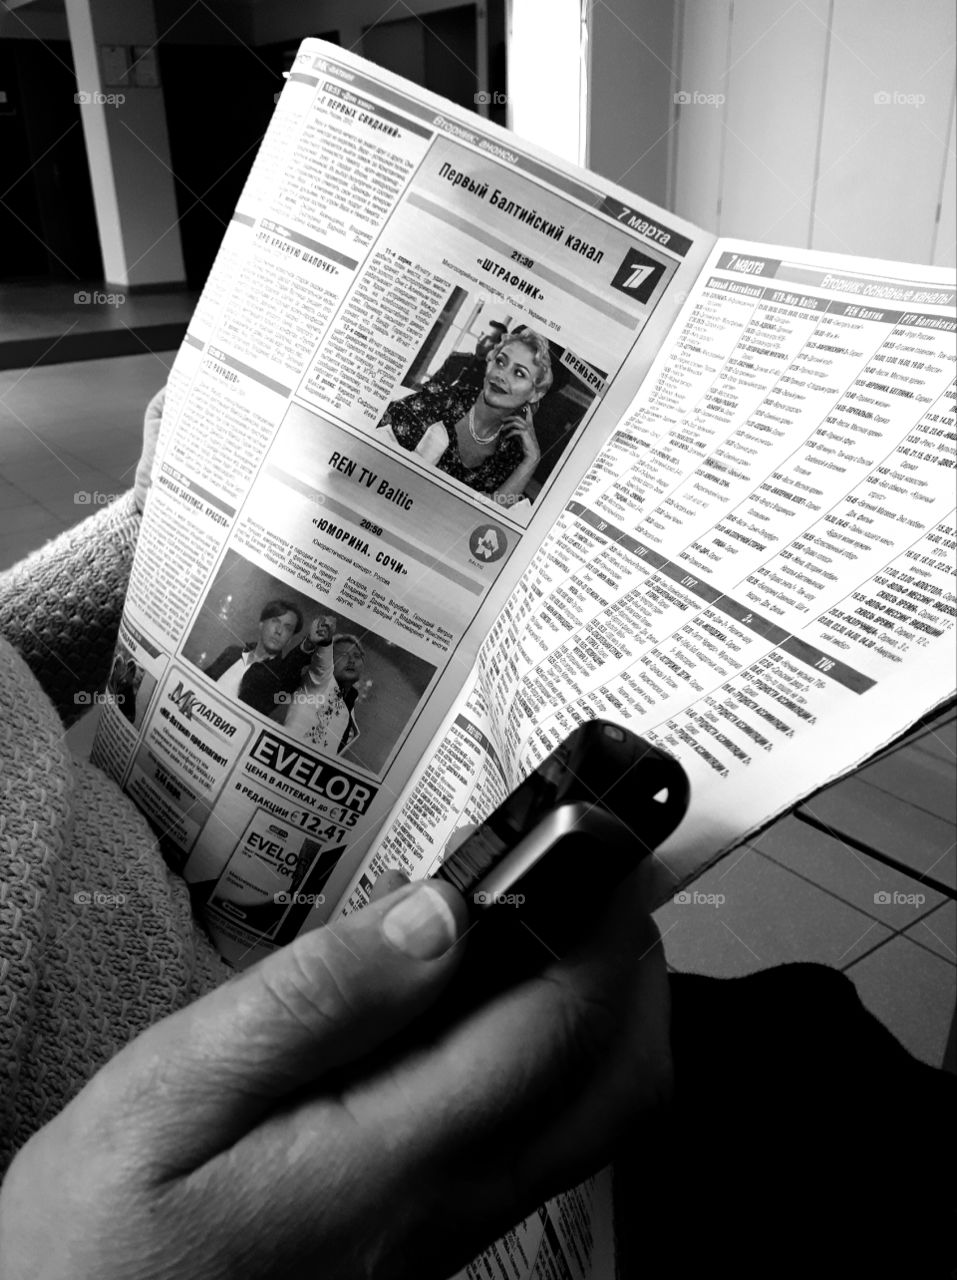 A woman reading newspaper and holding an old model smartphone in hand. Black and white photography.